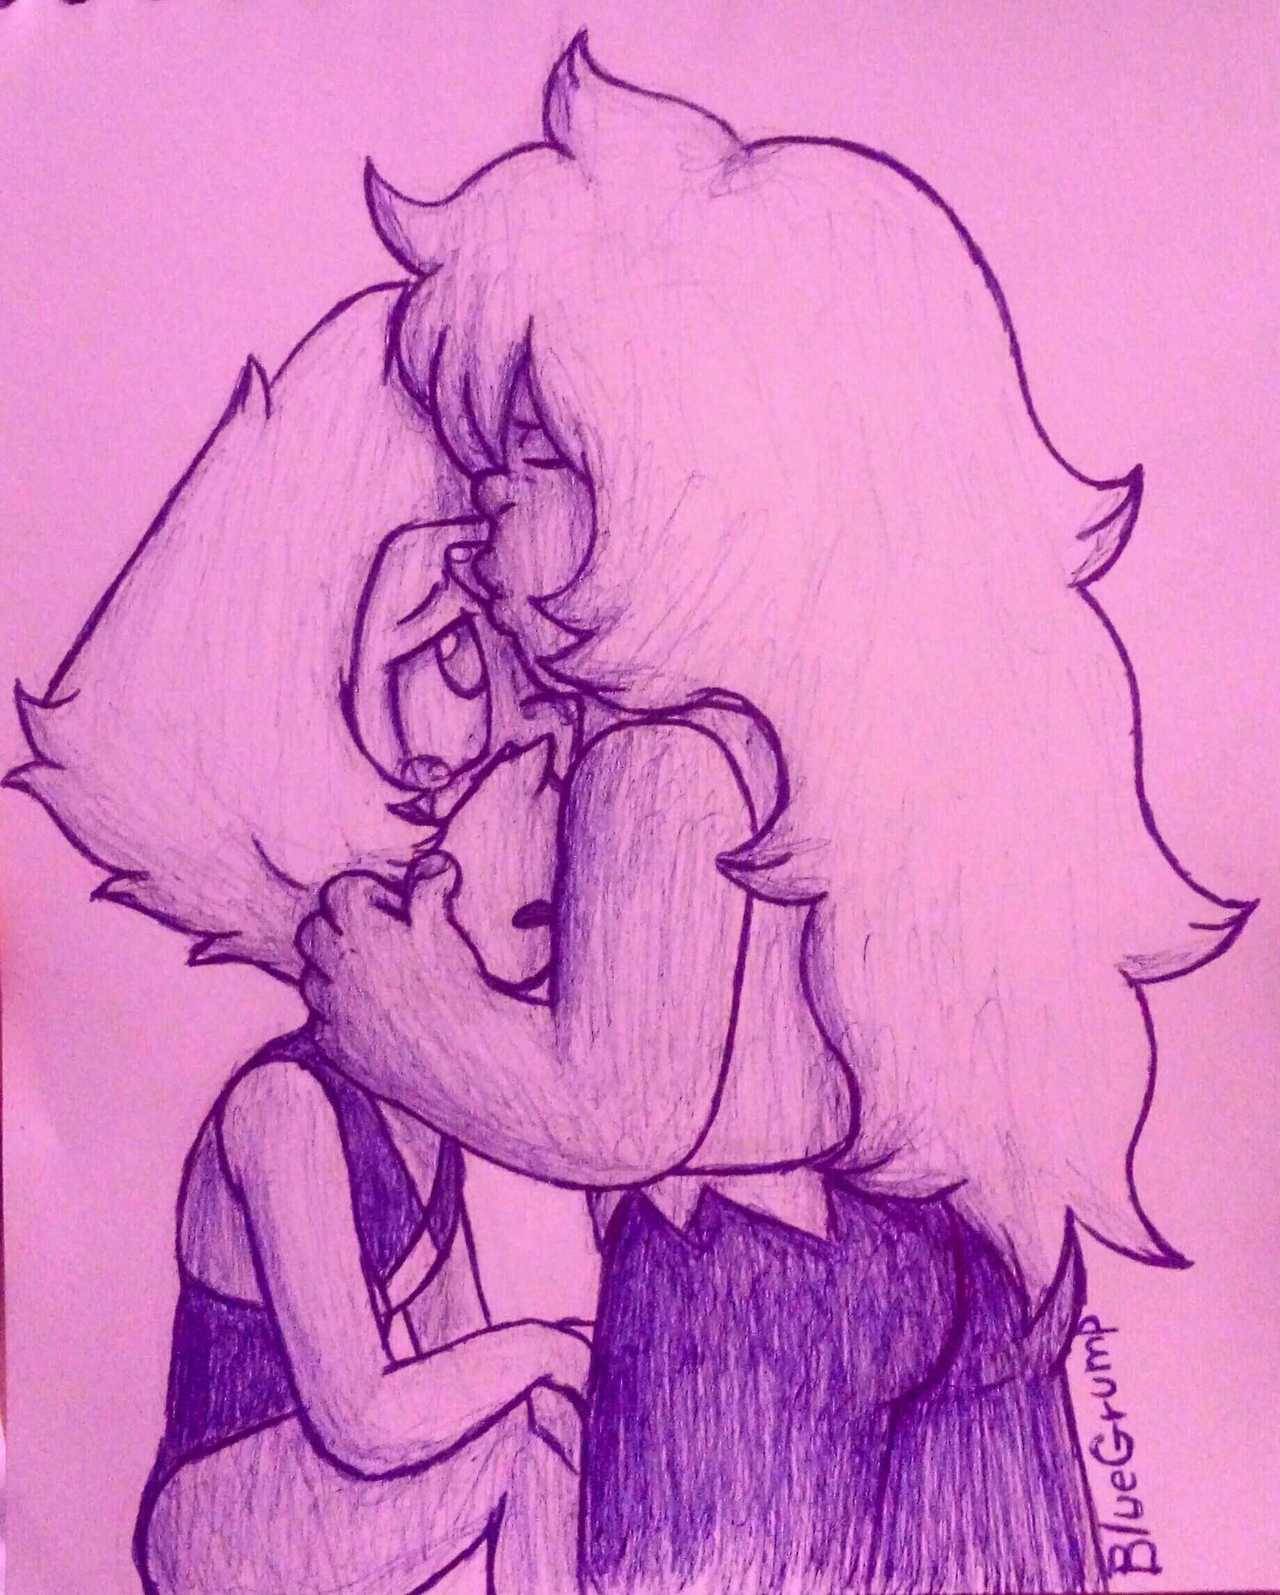 New artist / 25 / Su fandom, Lapis is my favorite, OTP Lapidot, but im good with almost anything, you may request me stuff, just be nice and i will be nice with...